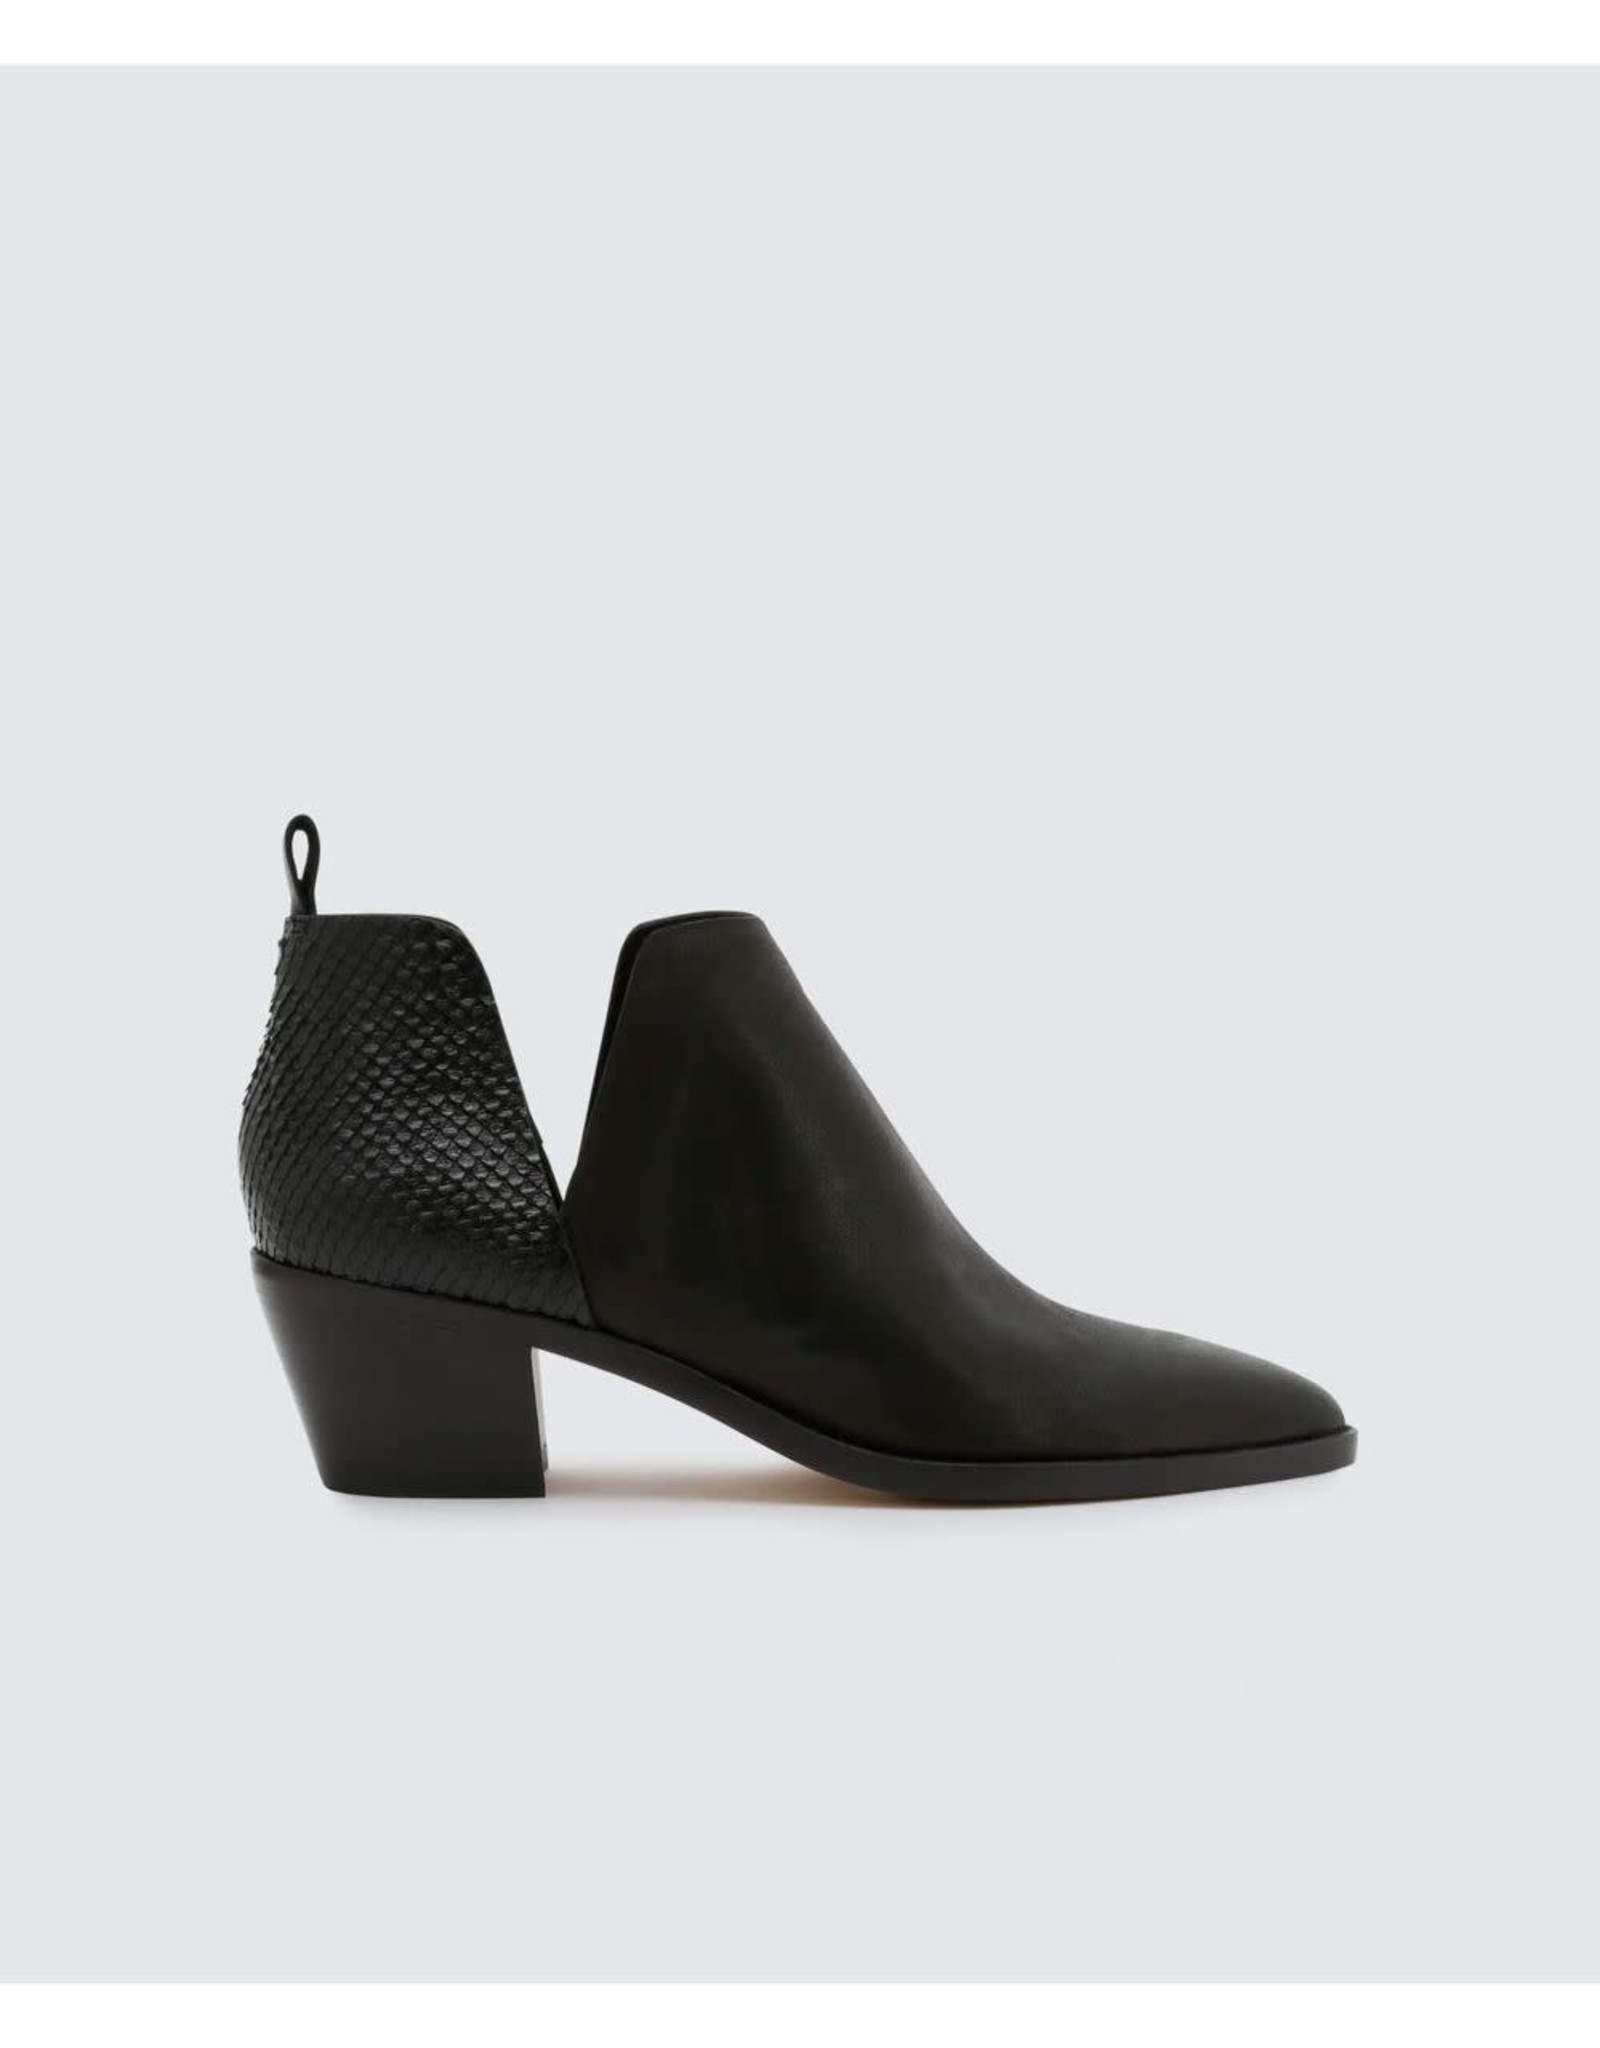 Dolce Vita Sonni Booties in Black 